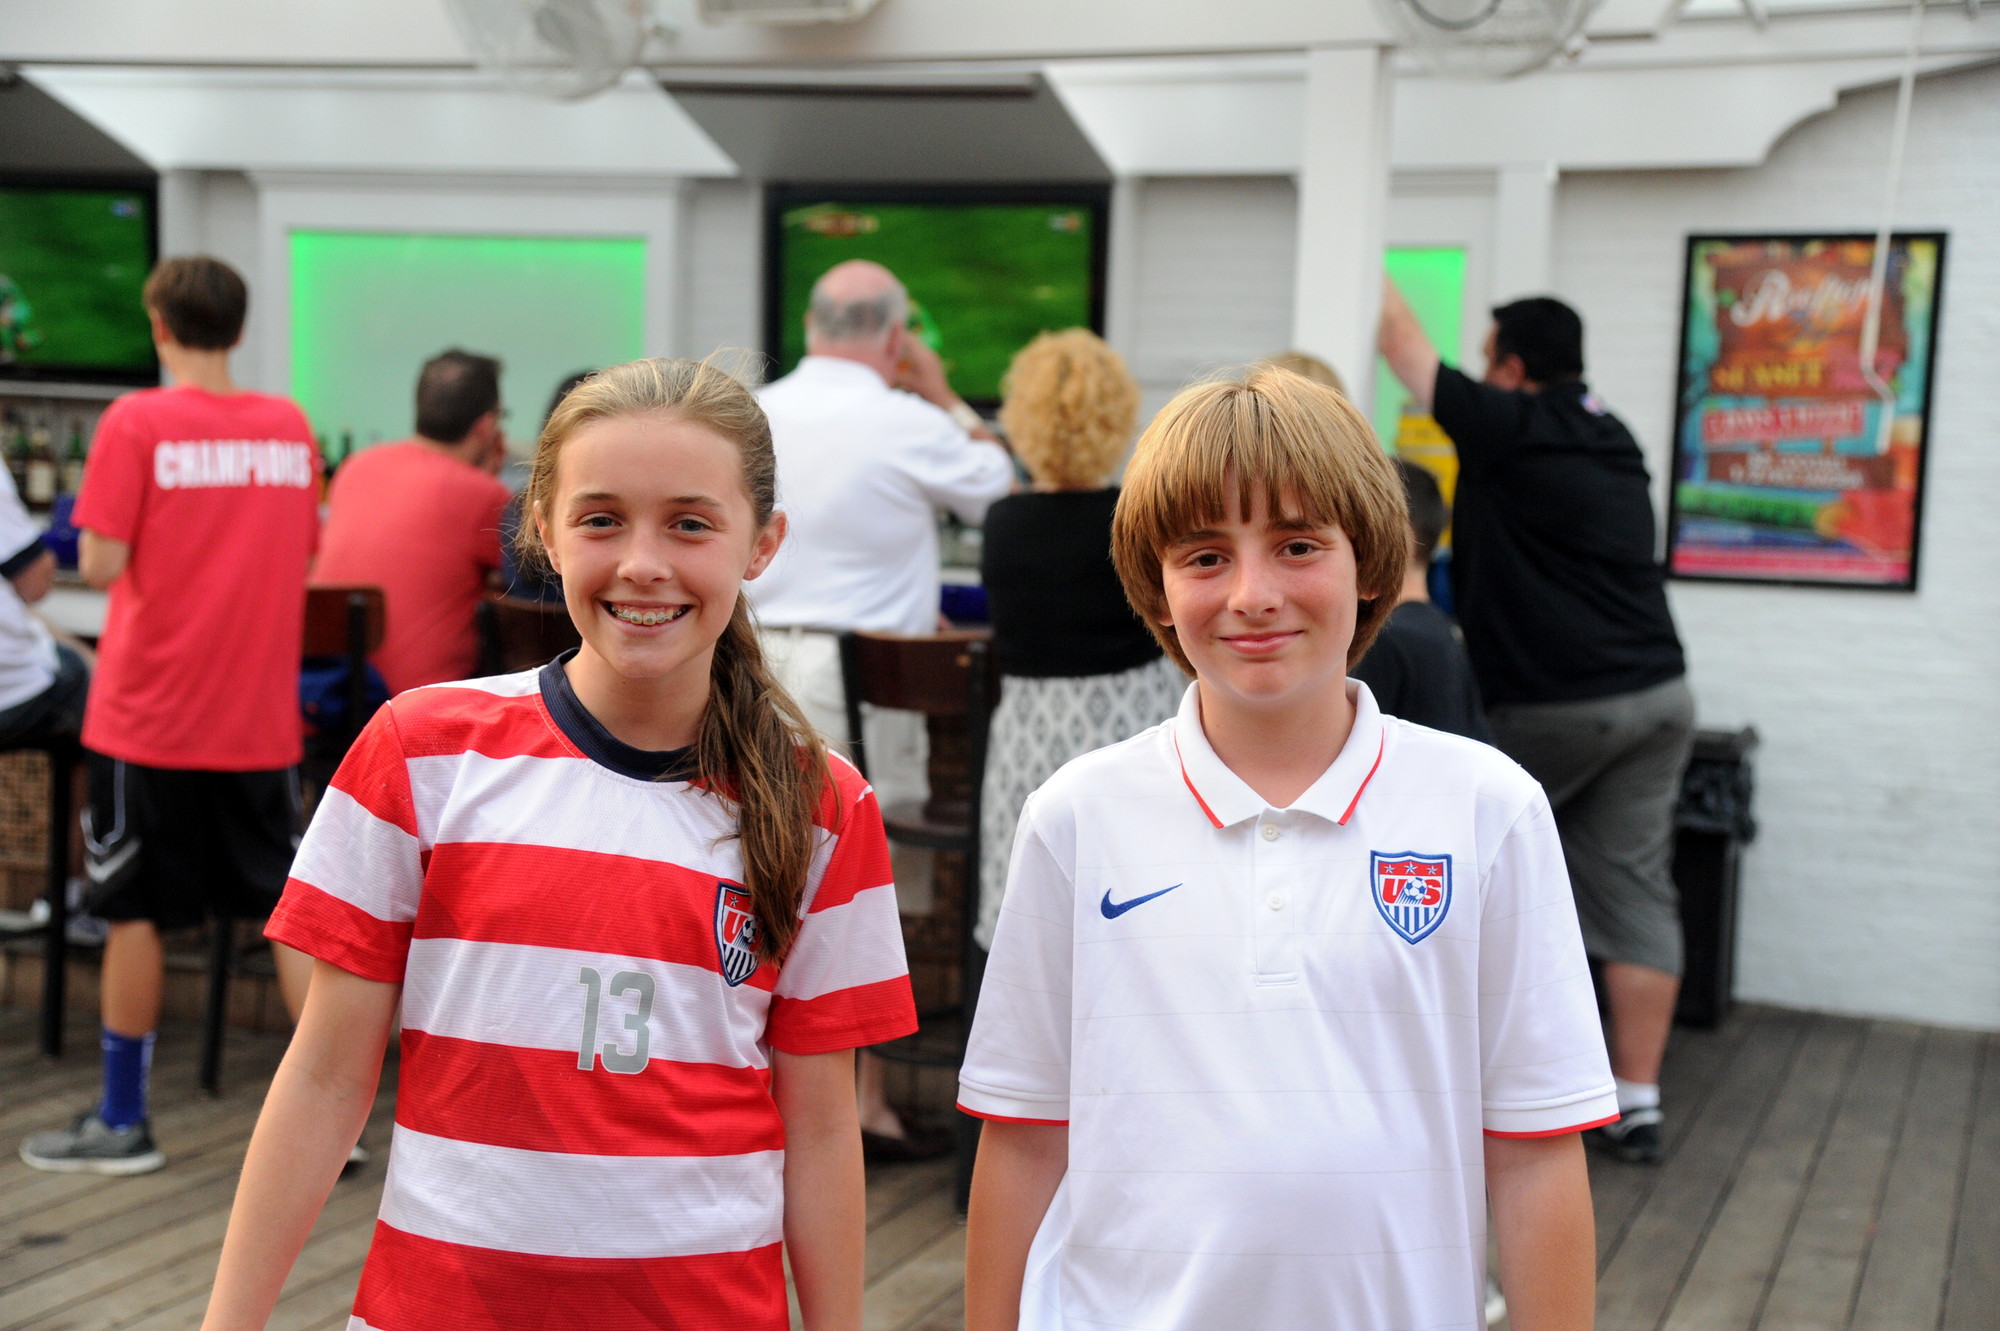 Kate Sweeney and Ryan McNichols, in their Team USA jerseys, came to Kasey’s to watch the game with their friends and family.